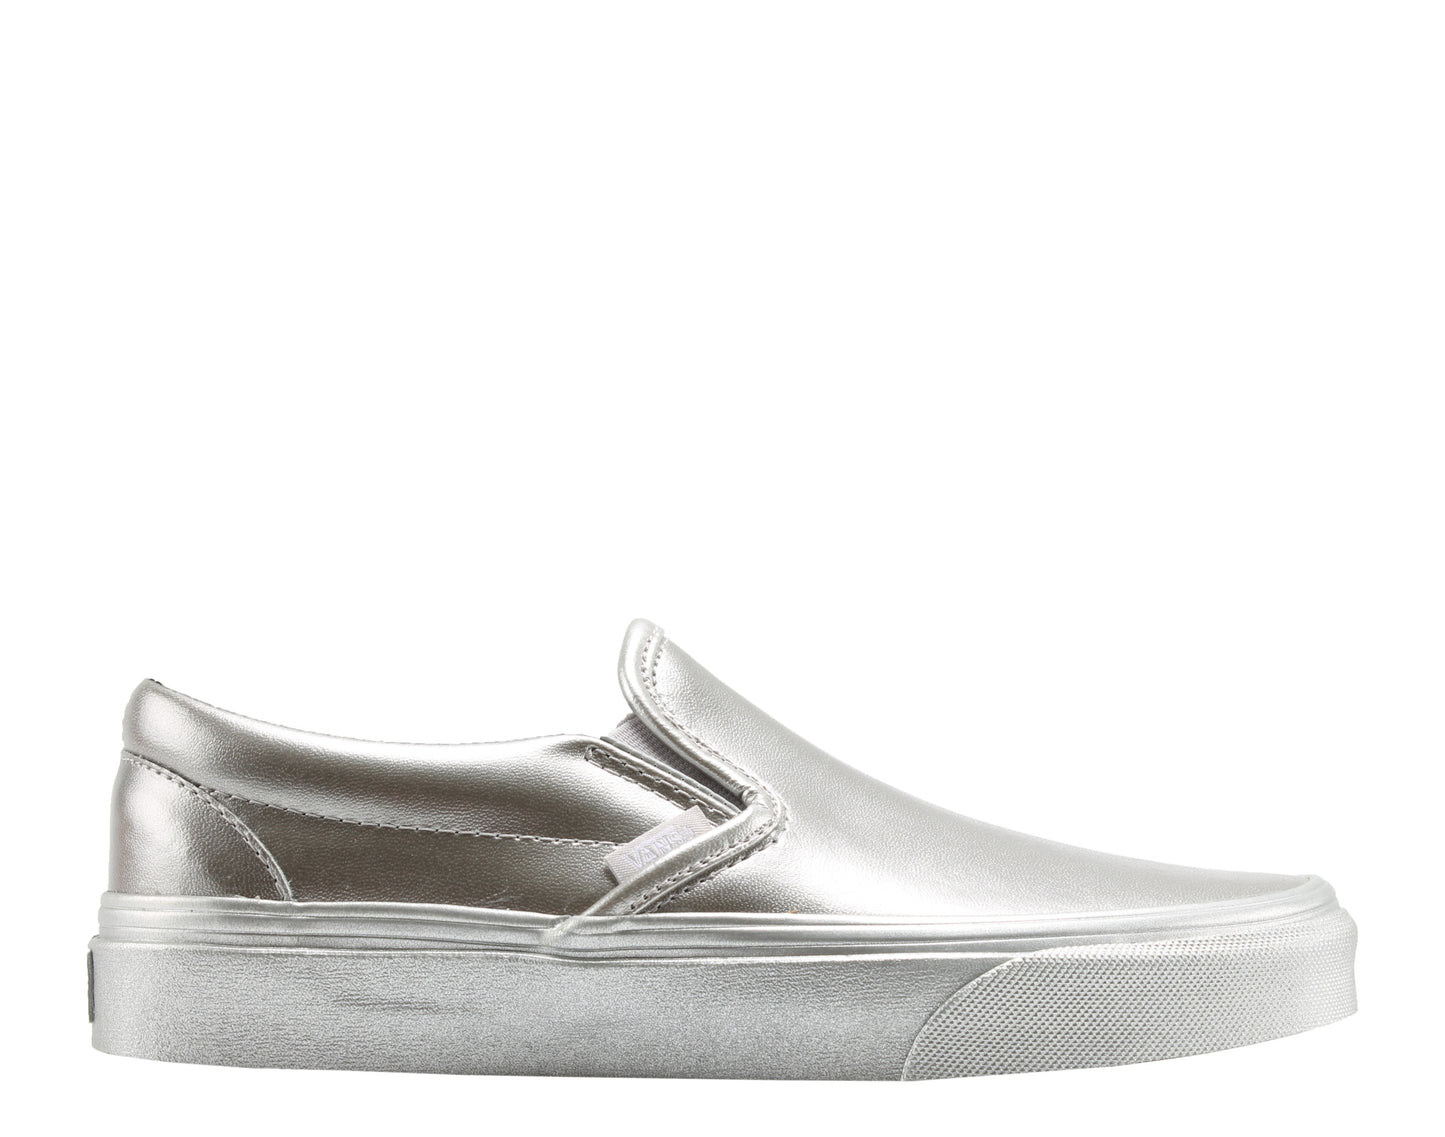 Vans Classic Slip On Metallic Sidewall Silver Low Top Sneakers VN0A38F7QTV